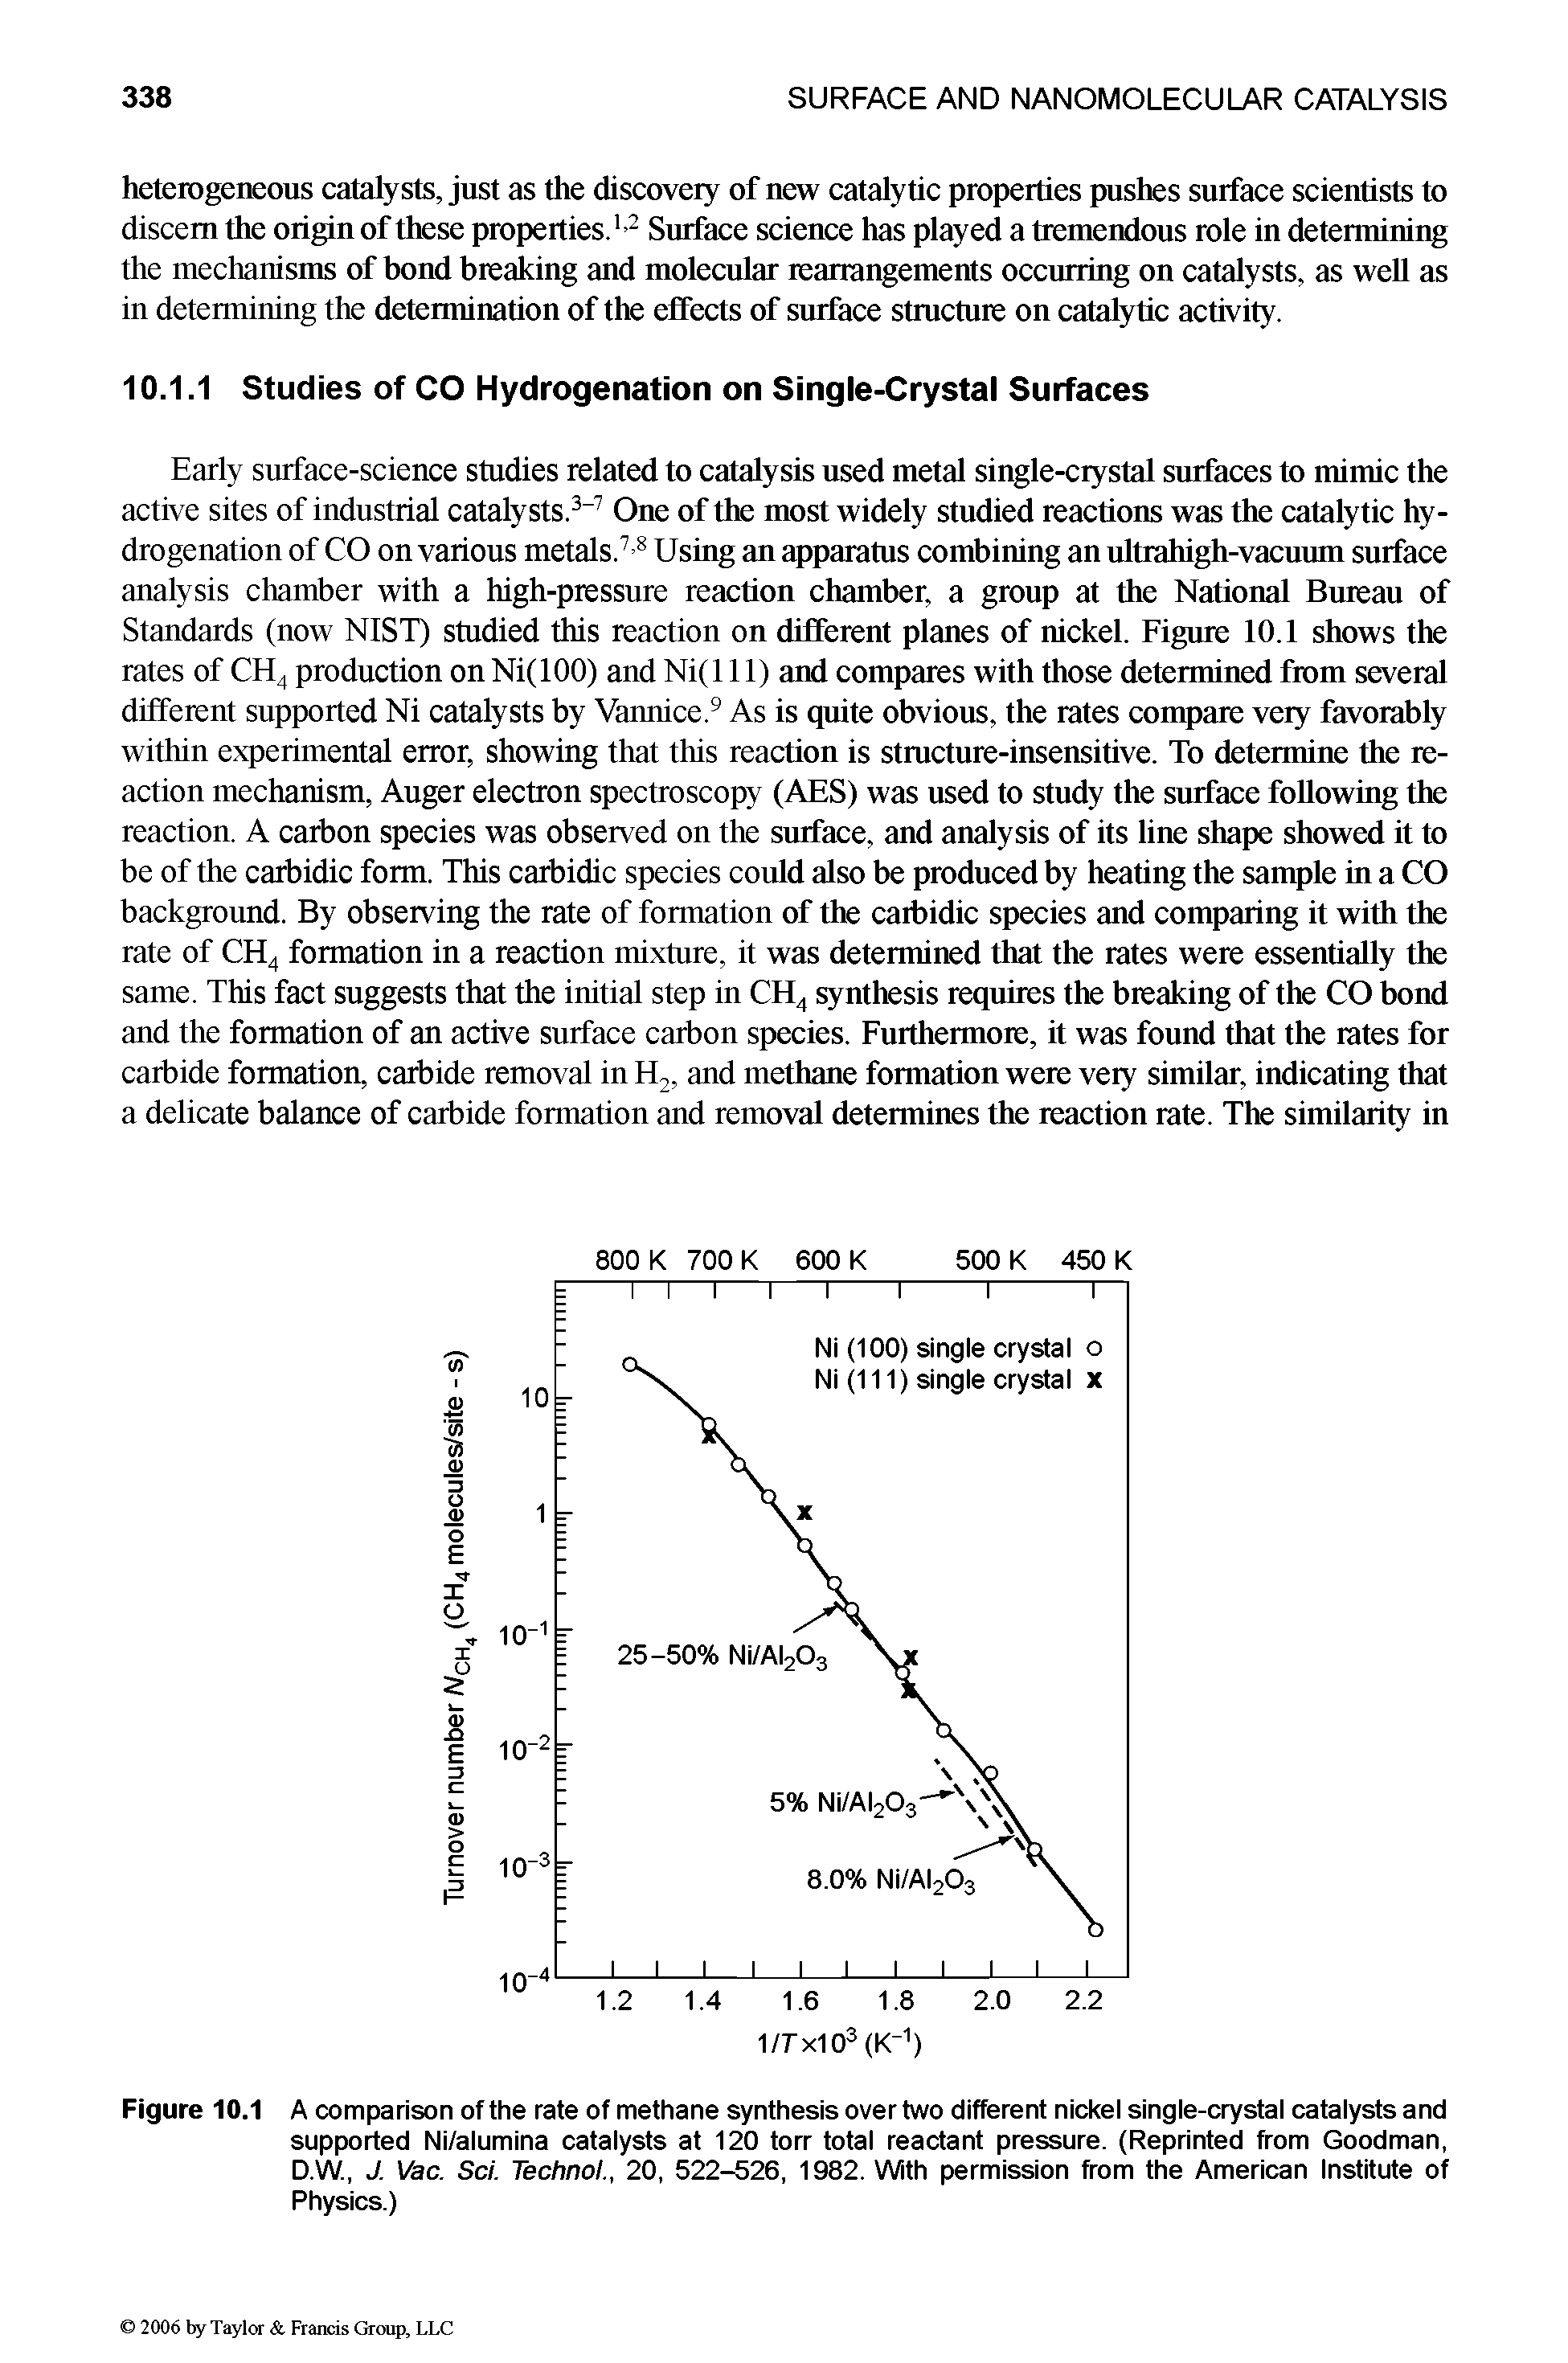 Figure 10.1 A comparison of the rate of methane synthesis overtwo different nickel single-crystal catalysts and supported Ni/alumina catalysts at 120 torr total reactant pressure. (Reprinted from Goodman, D.W., J. Vac. Sci. Technol., 20, 522-526, 1982. With permission from the American Institute of Physics.)...